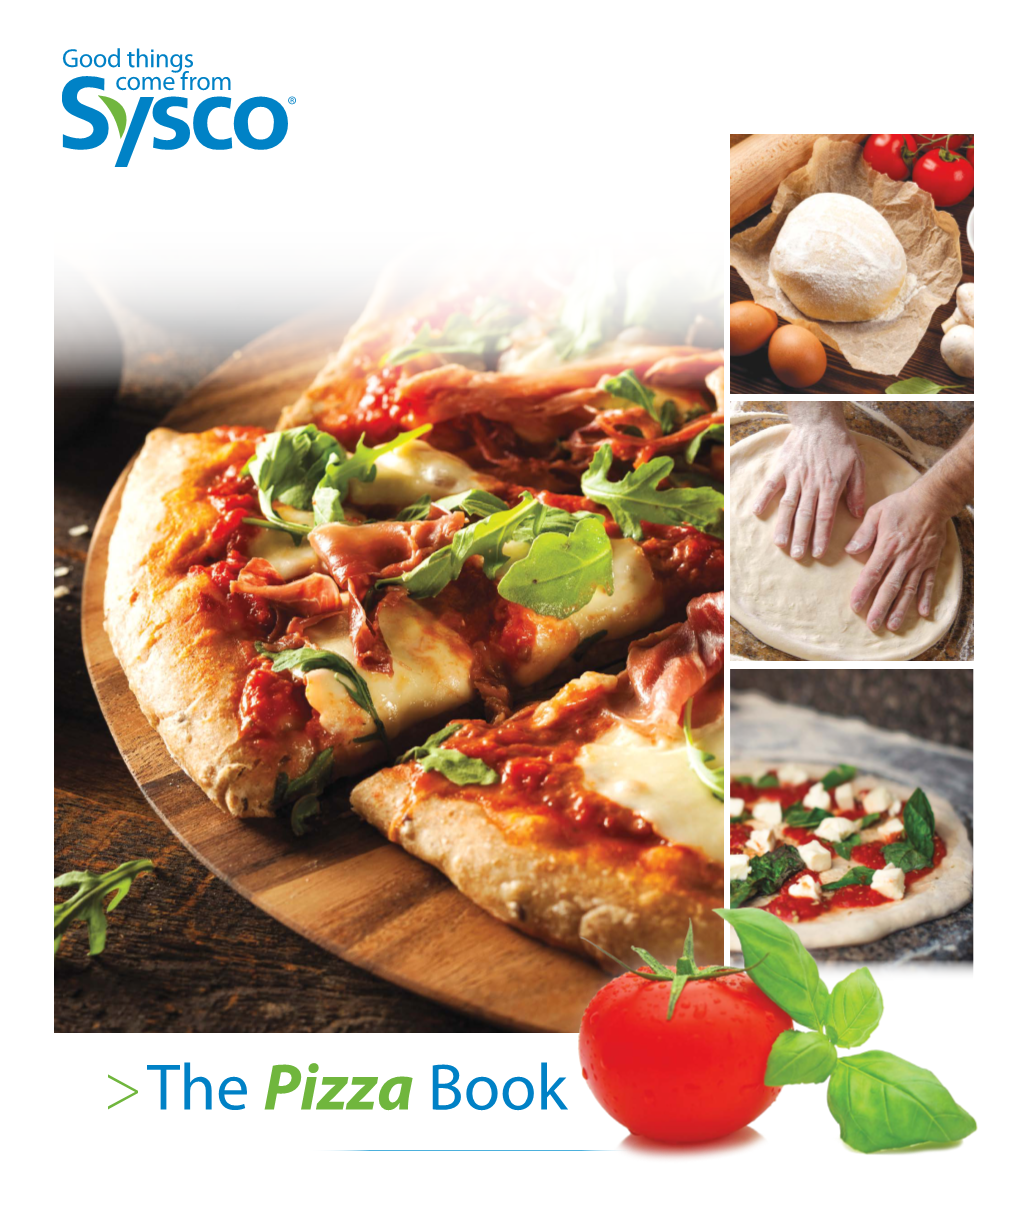 The Pizza Book